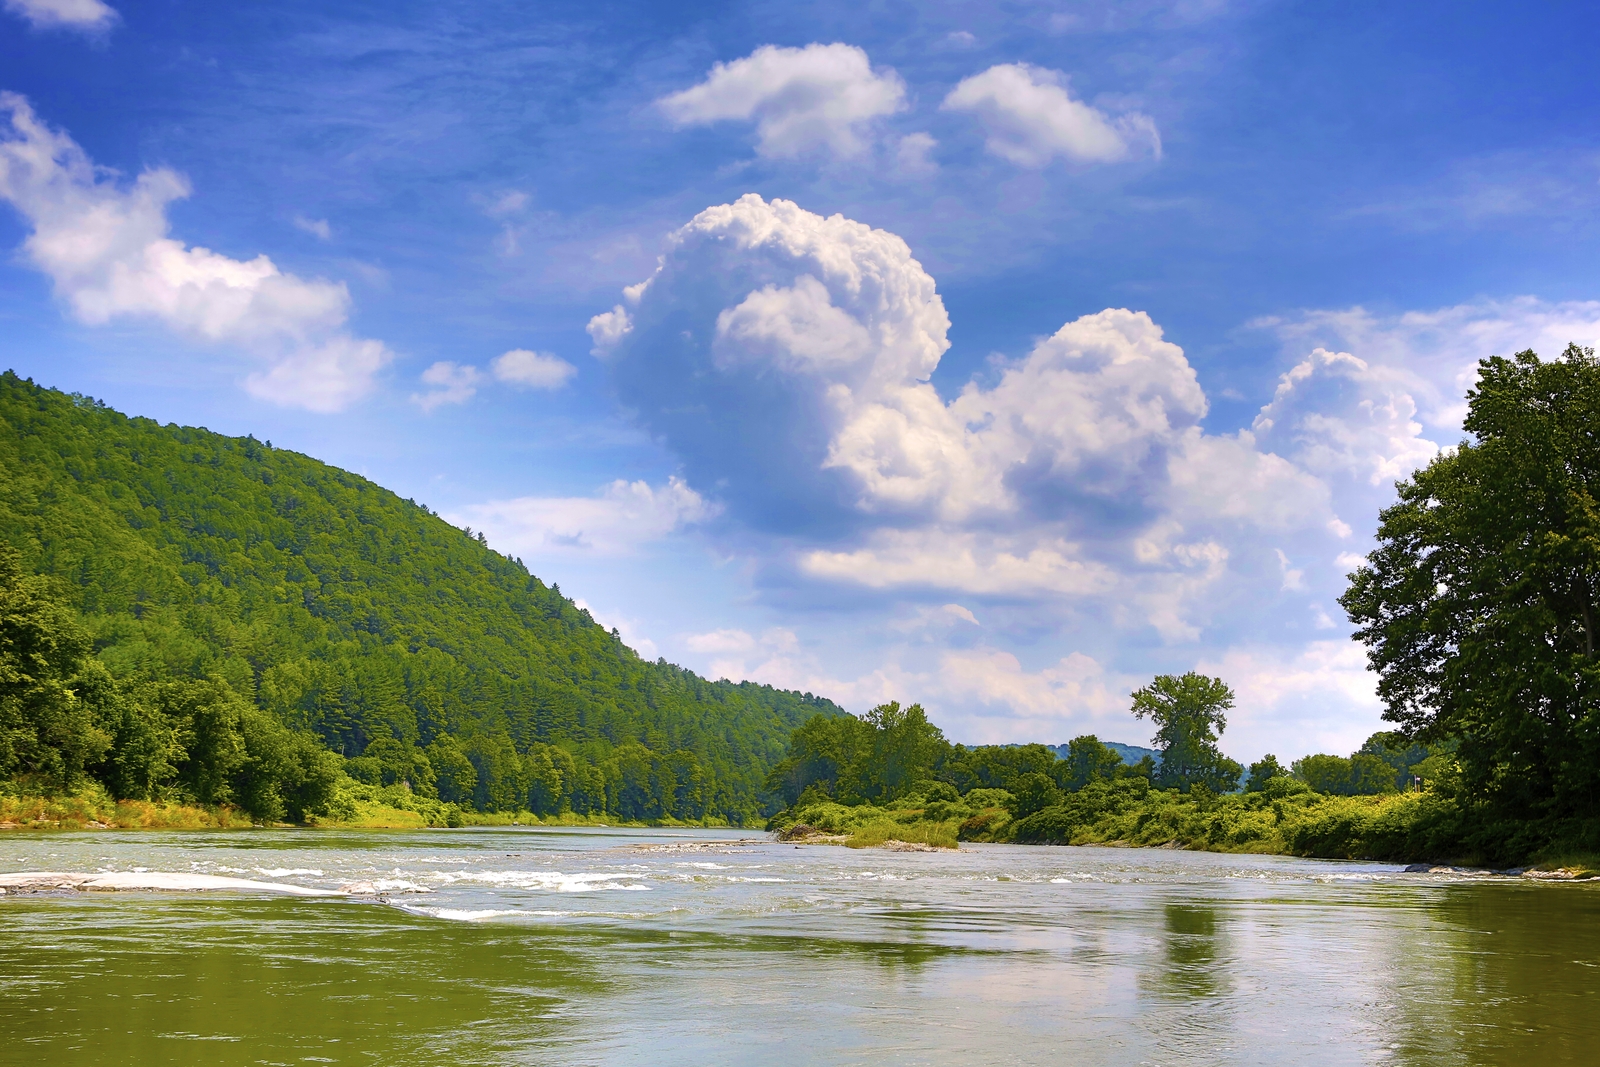 Photograph of the White River at Vermont Law and Graduate School in Summertime